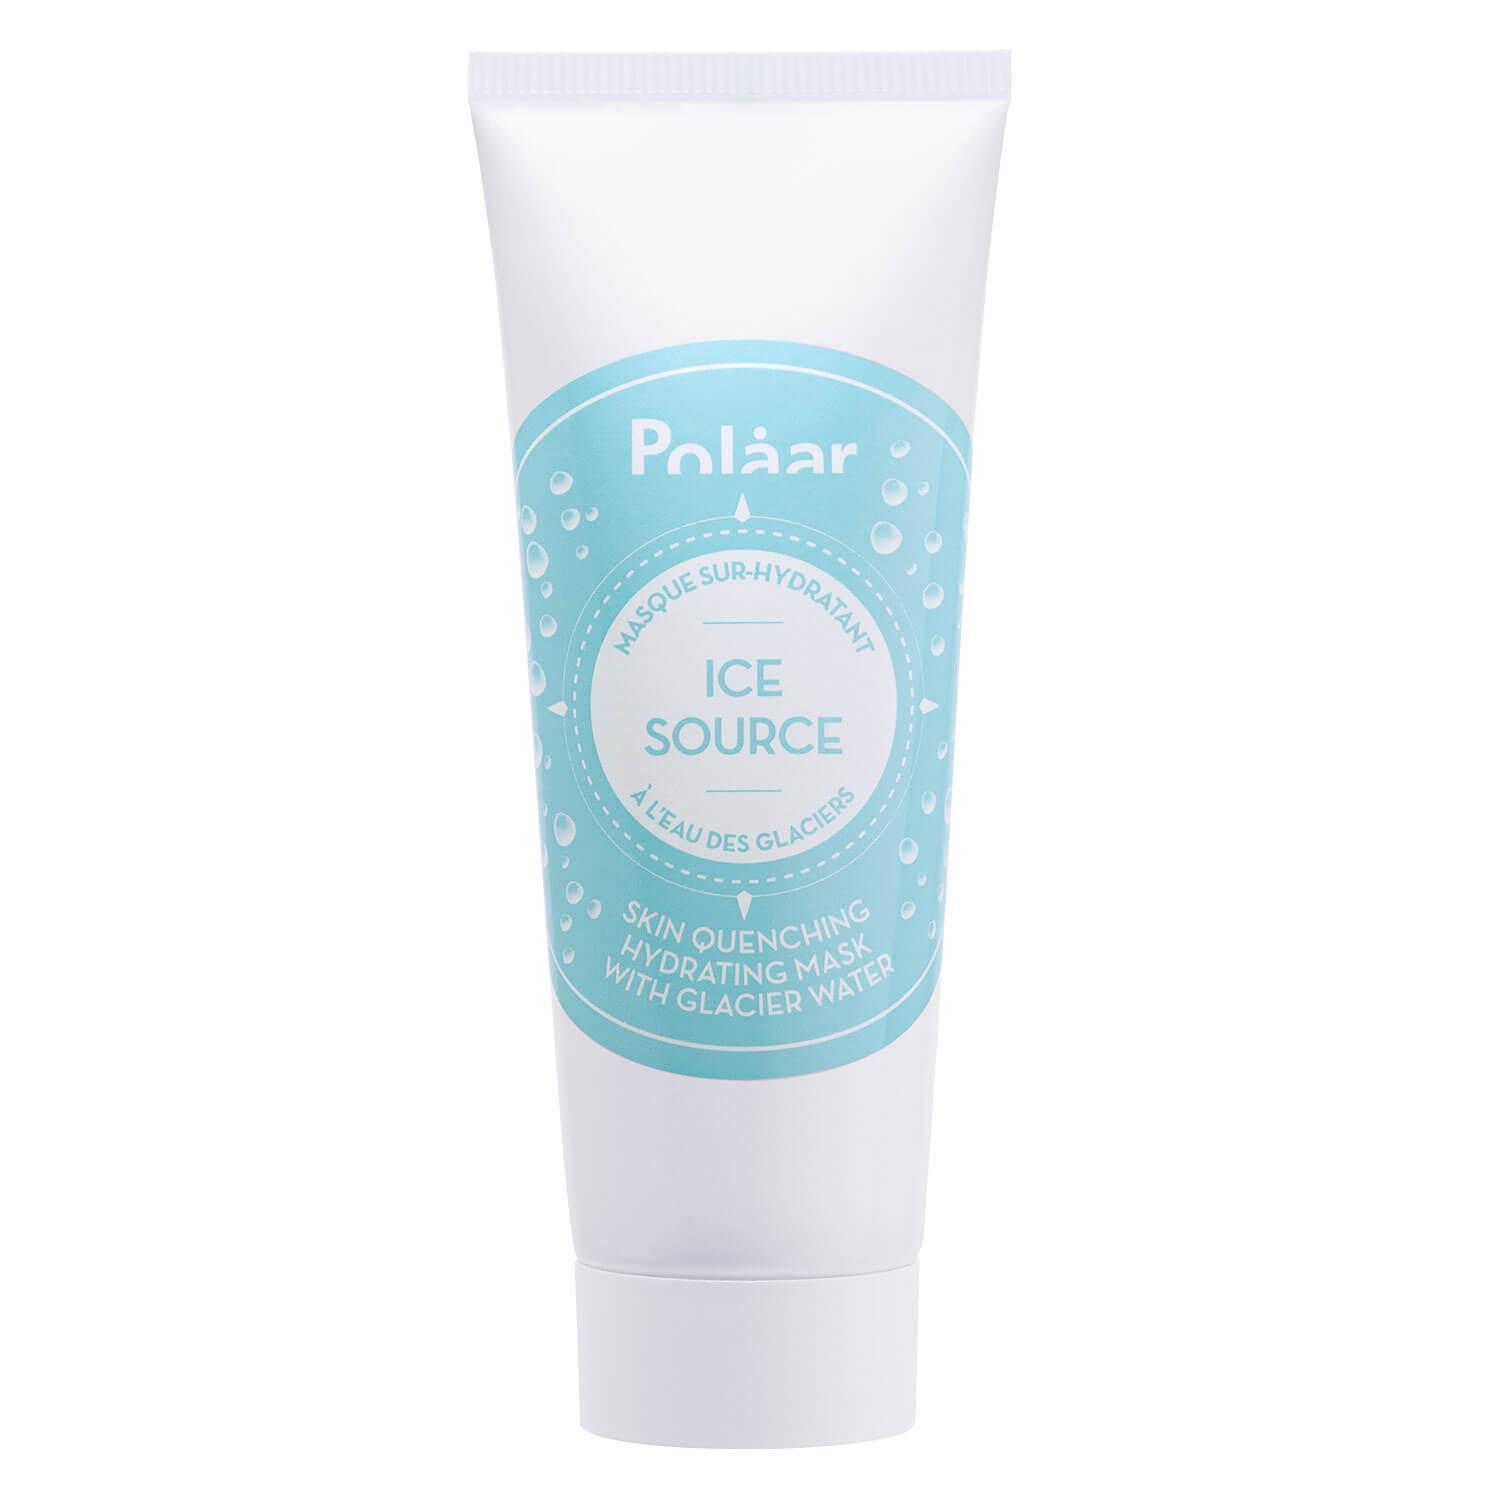 Polaar - Ice Source Skin Quenching Hydrating Mask